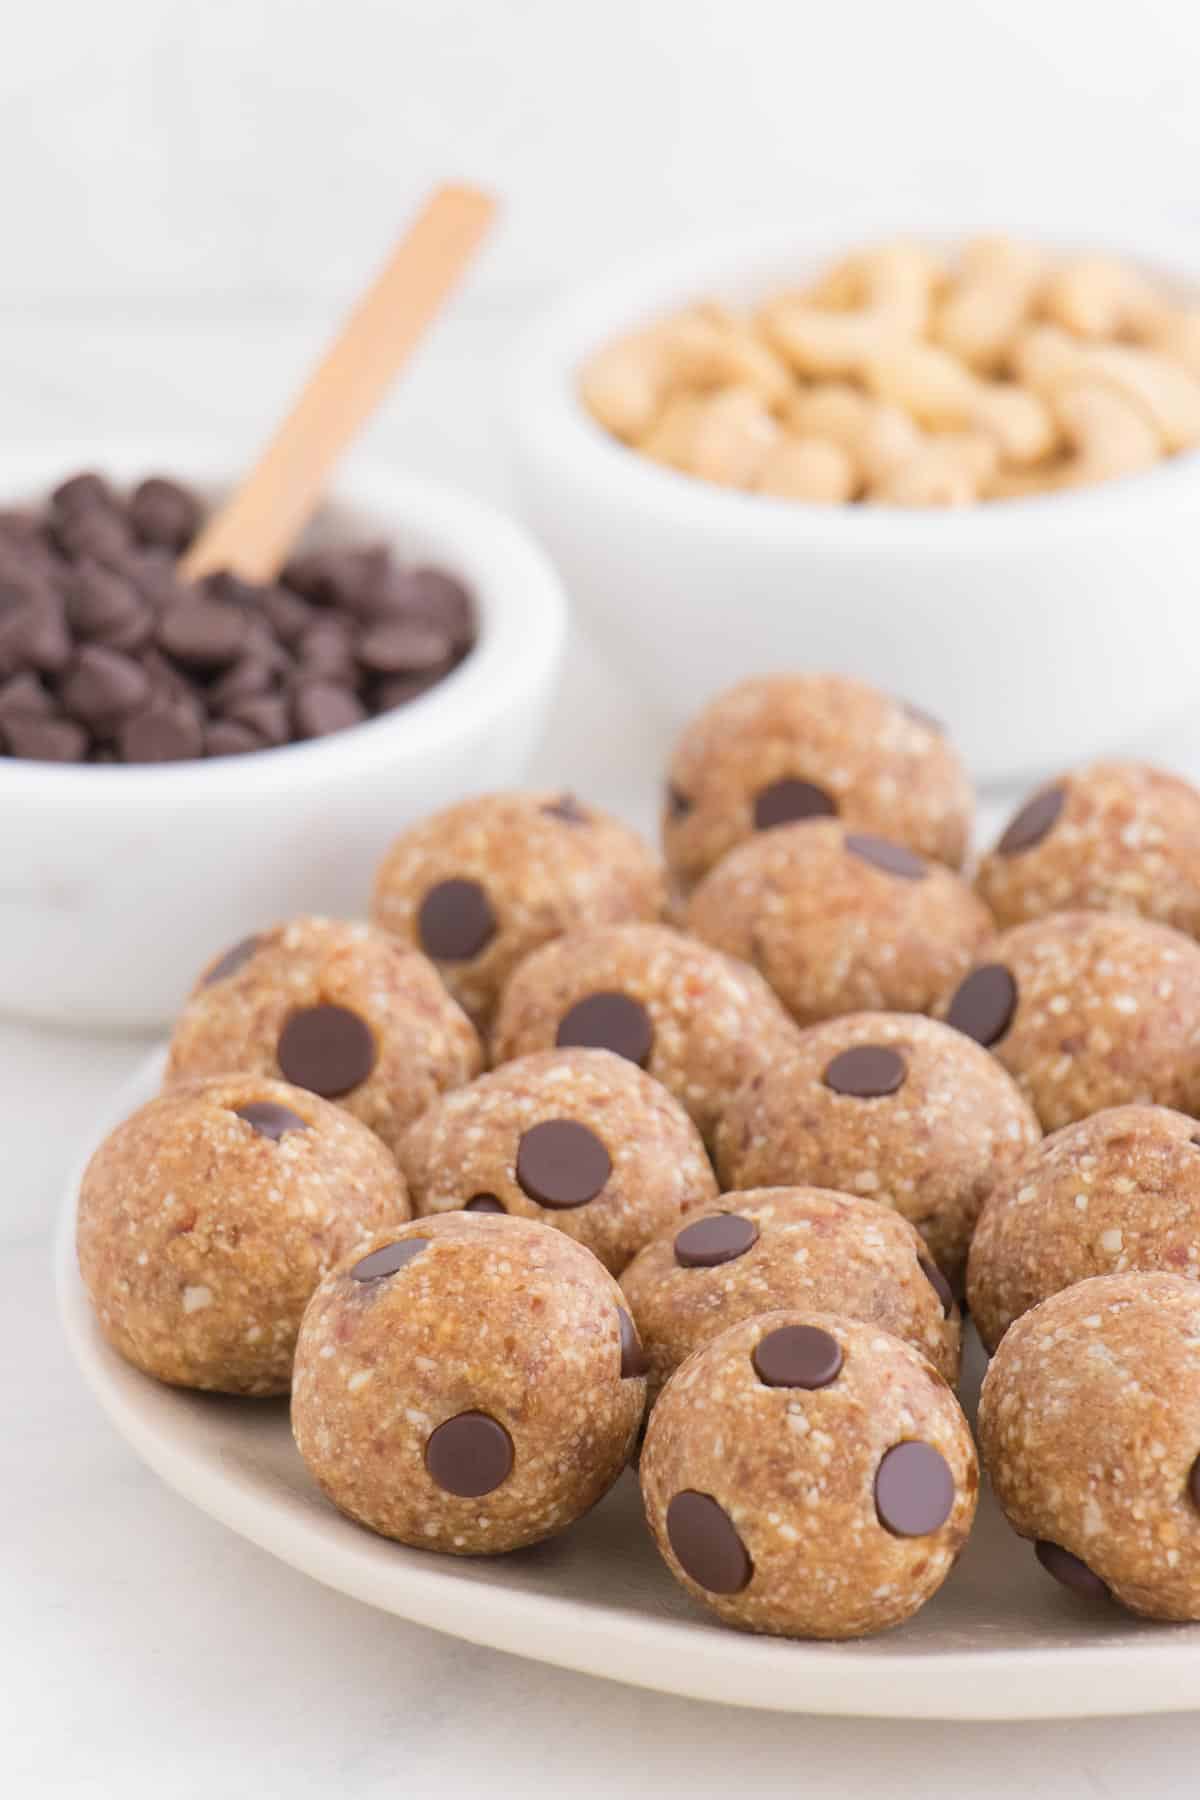 balls of cookie dough on a plate in front of chocolate chips and cashews